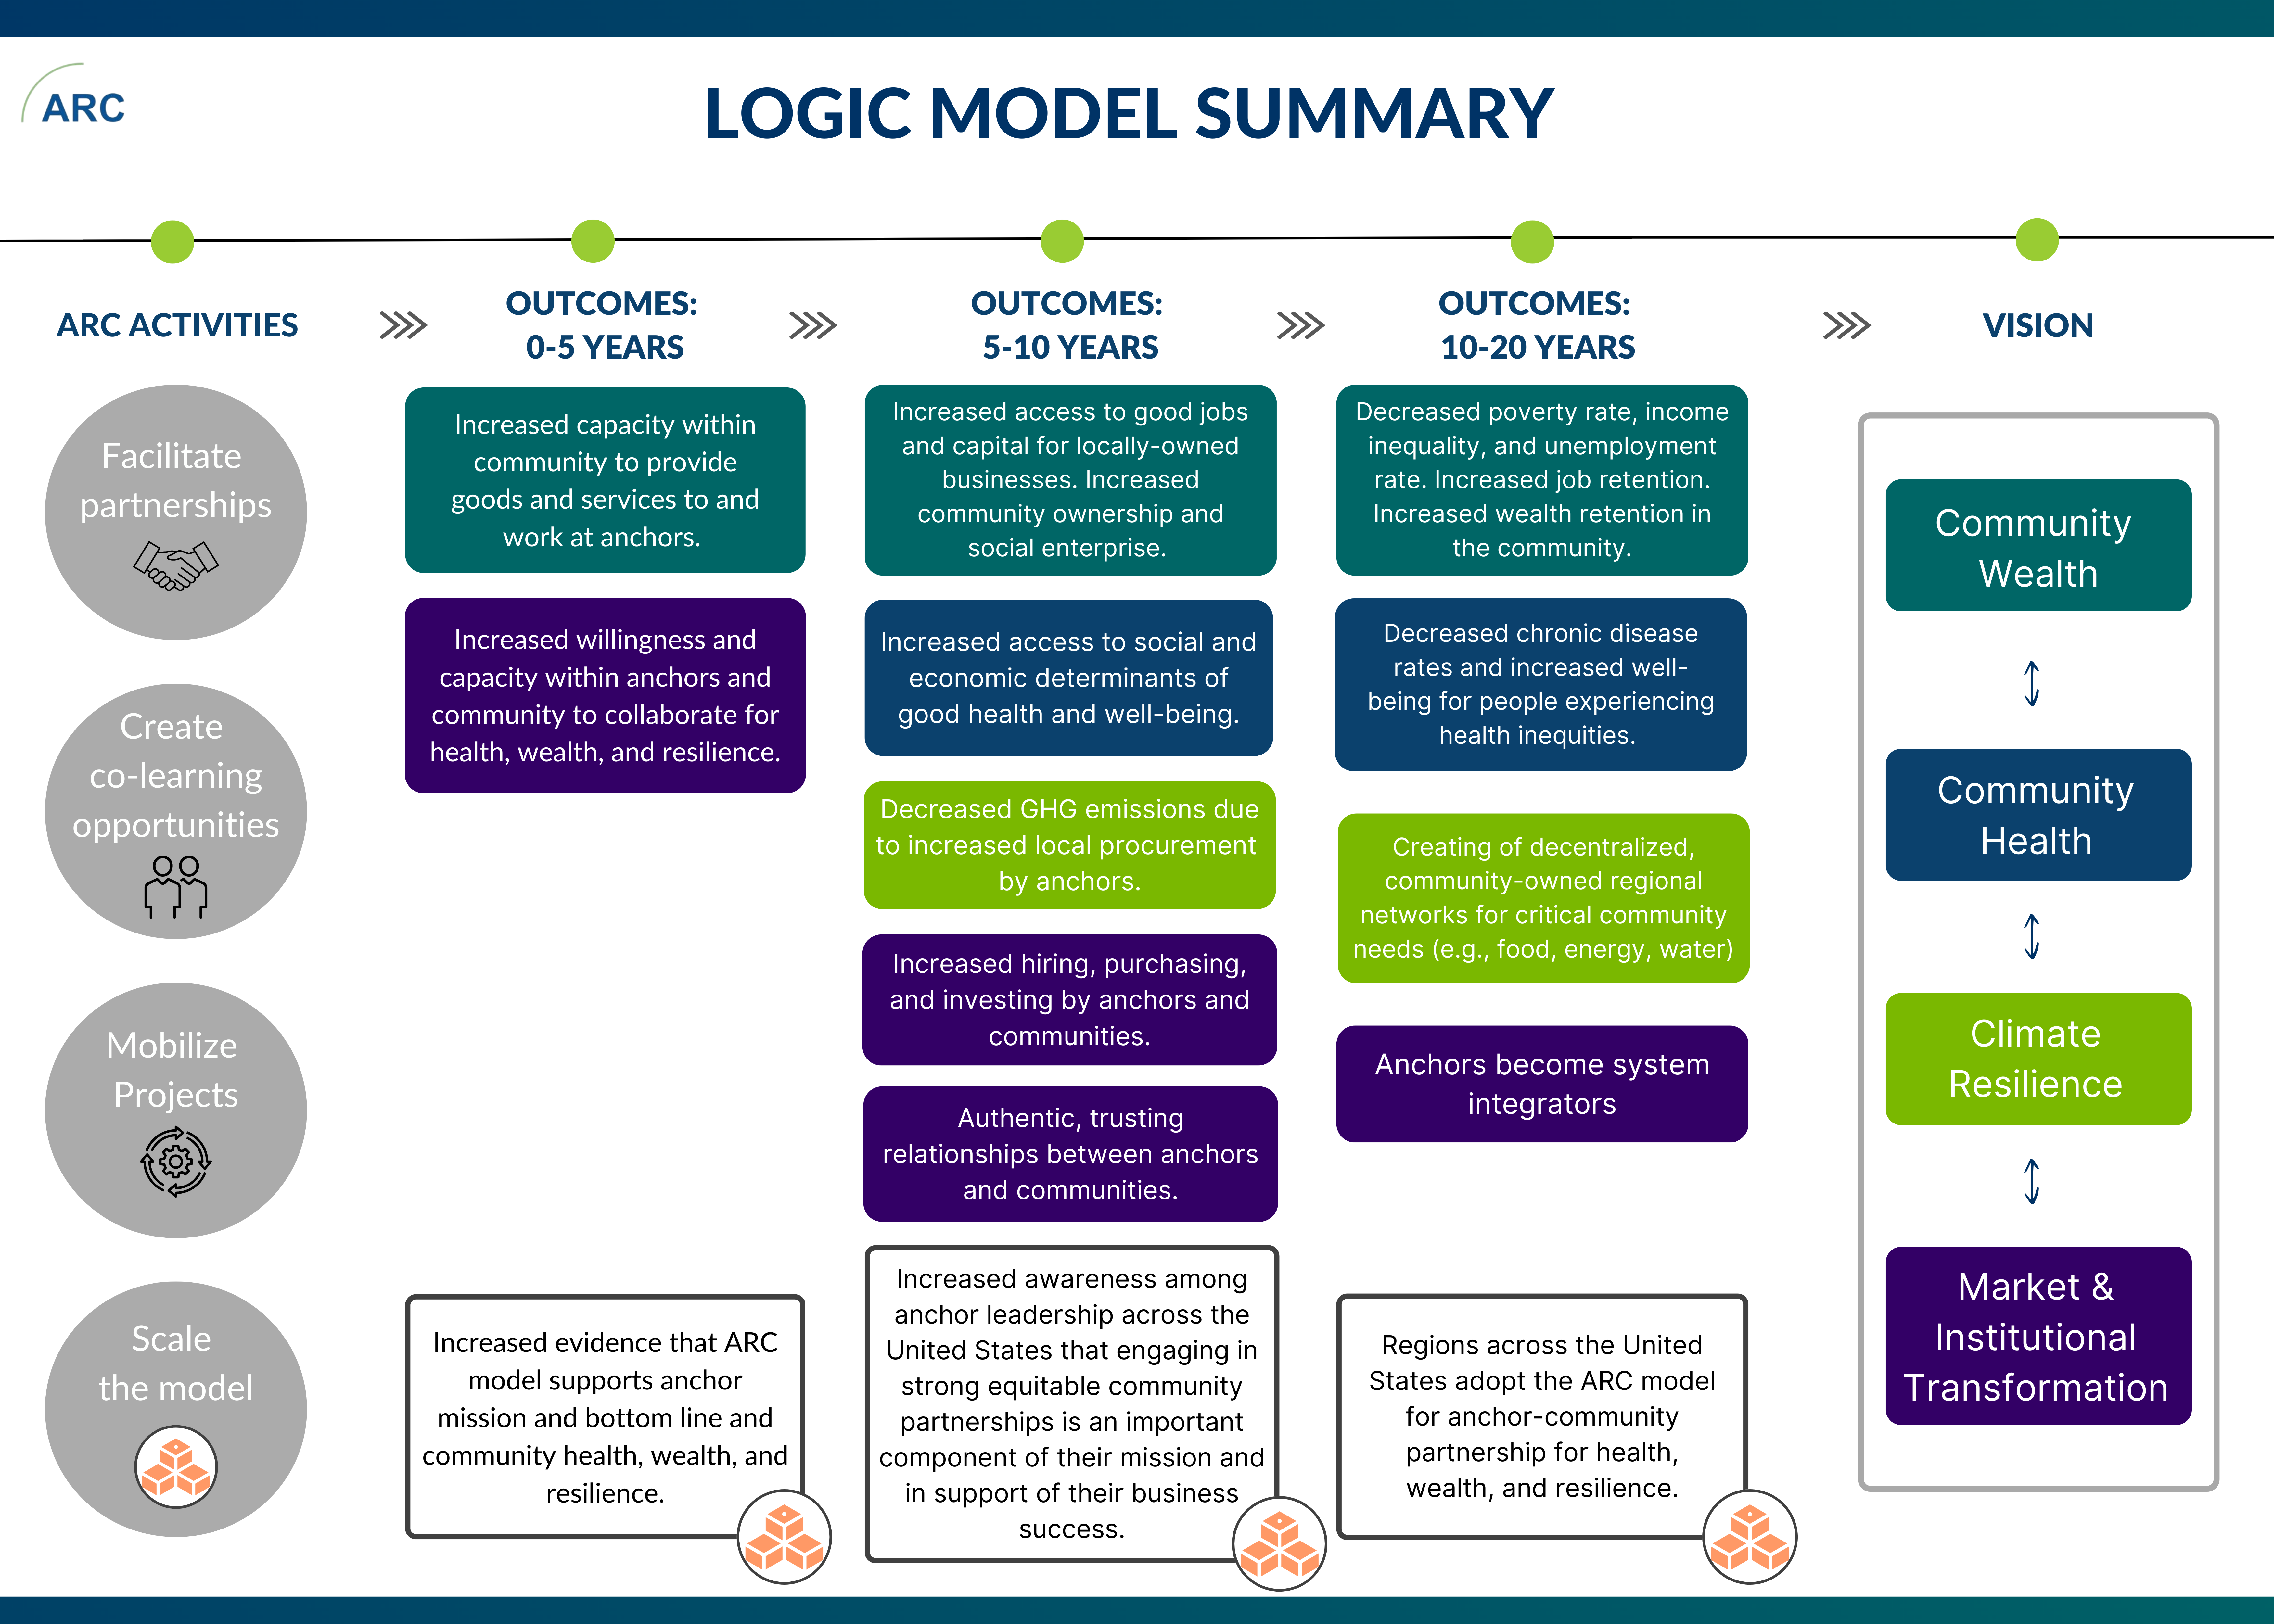 Logic Model Summary flowchart detailing ARC activities, outcomes and vision.